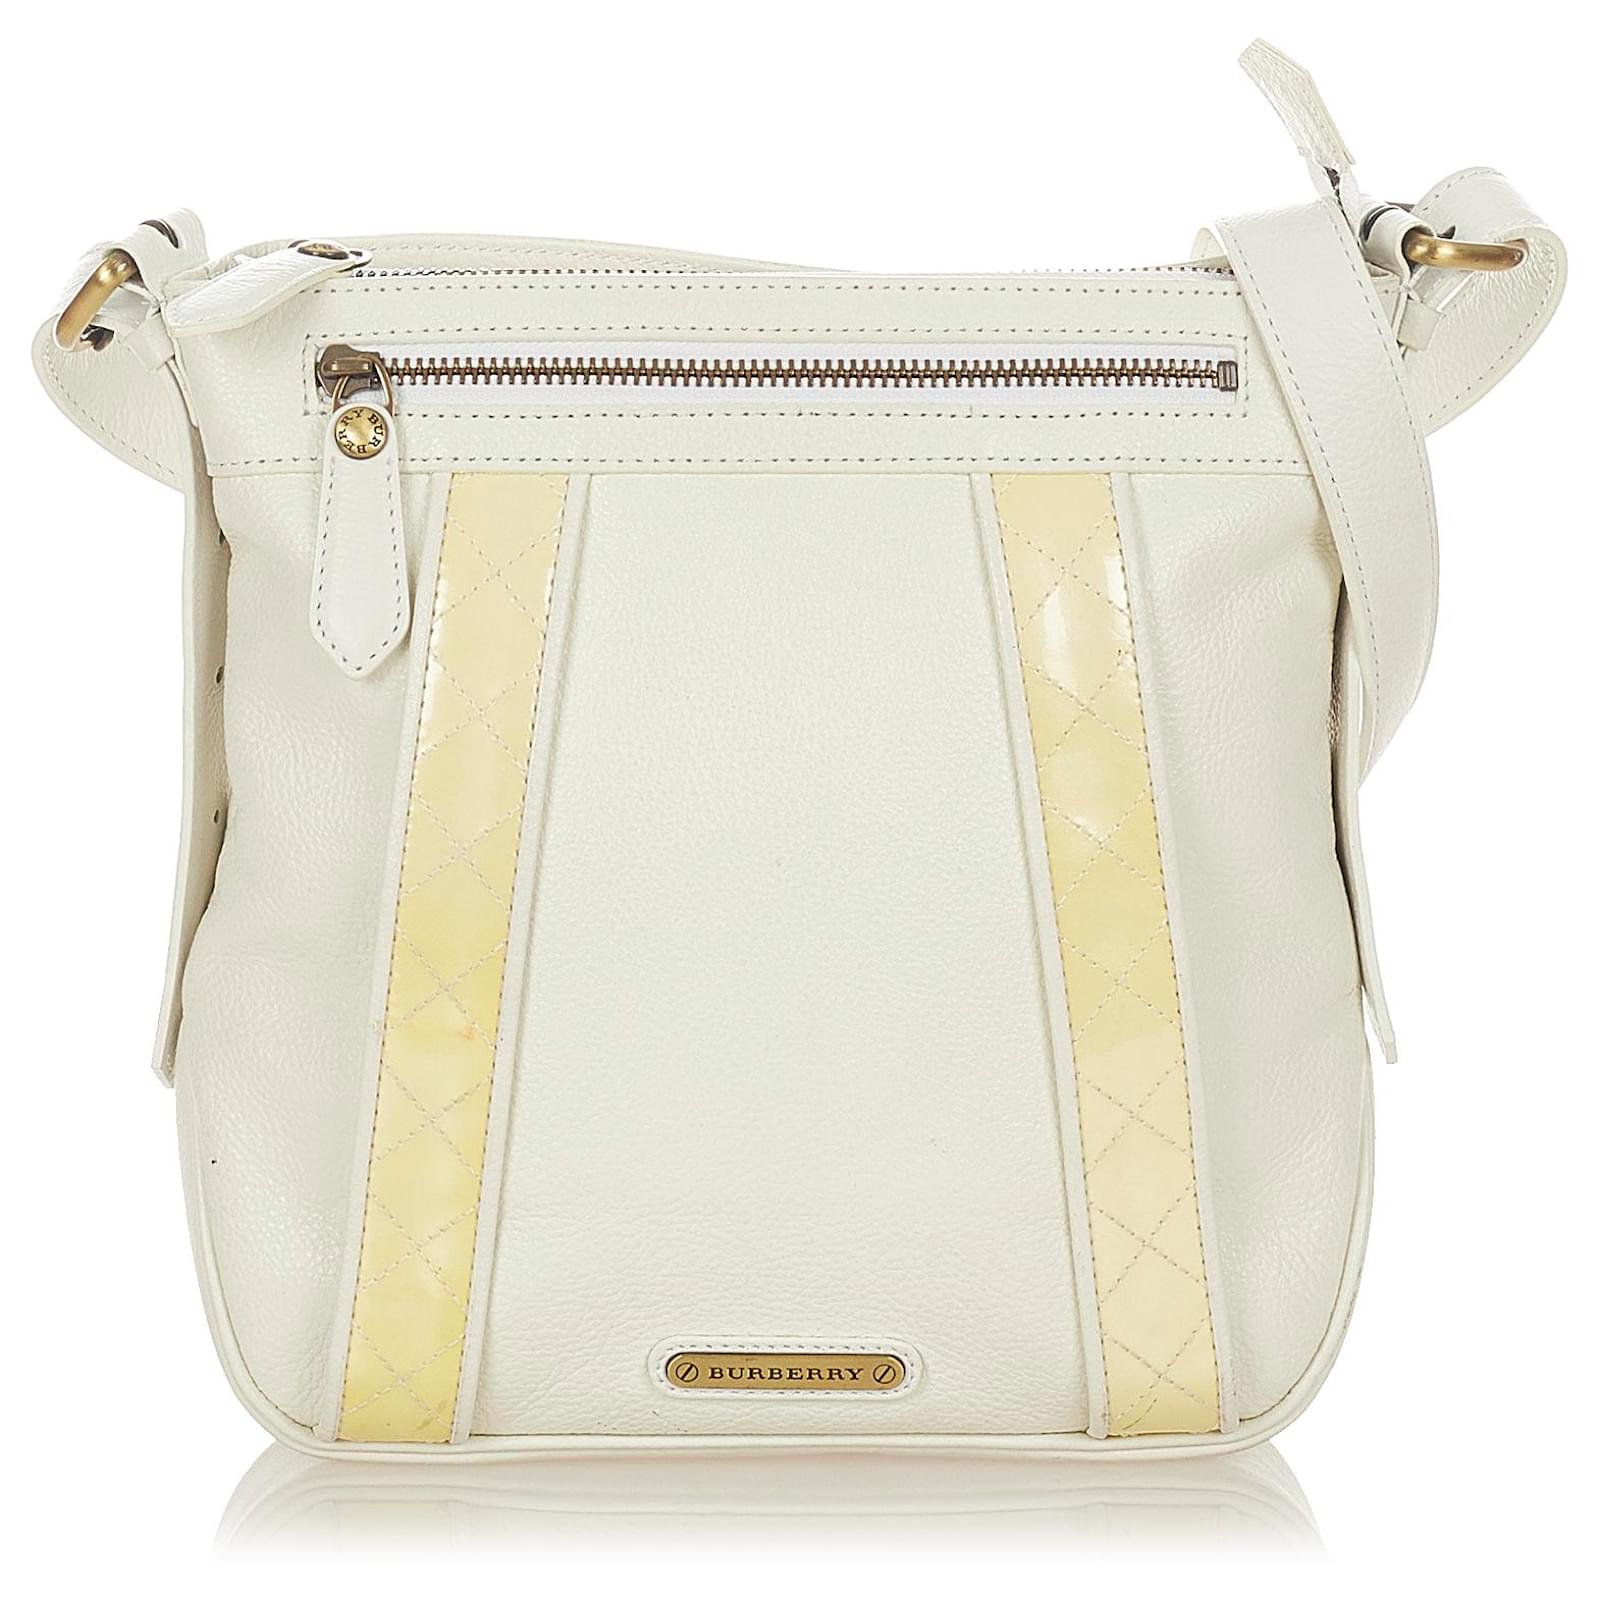 Cross body bags Burberry - White Leather Mini Shoulder Bag with Monogram -  8070483